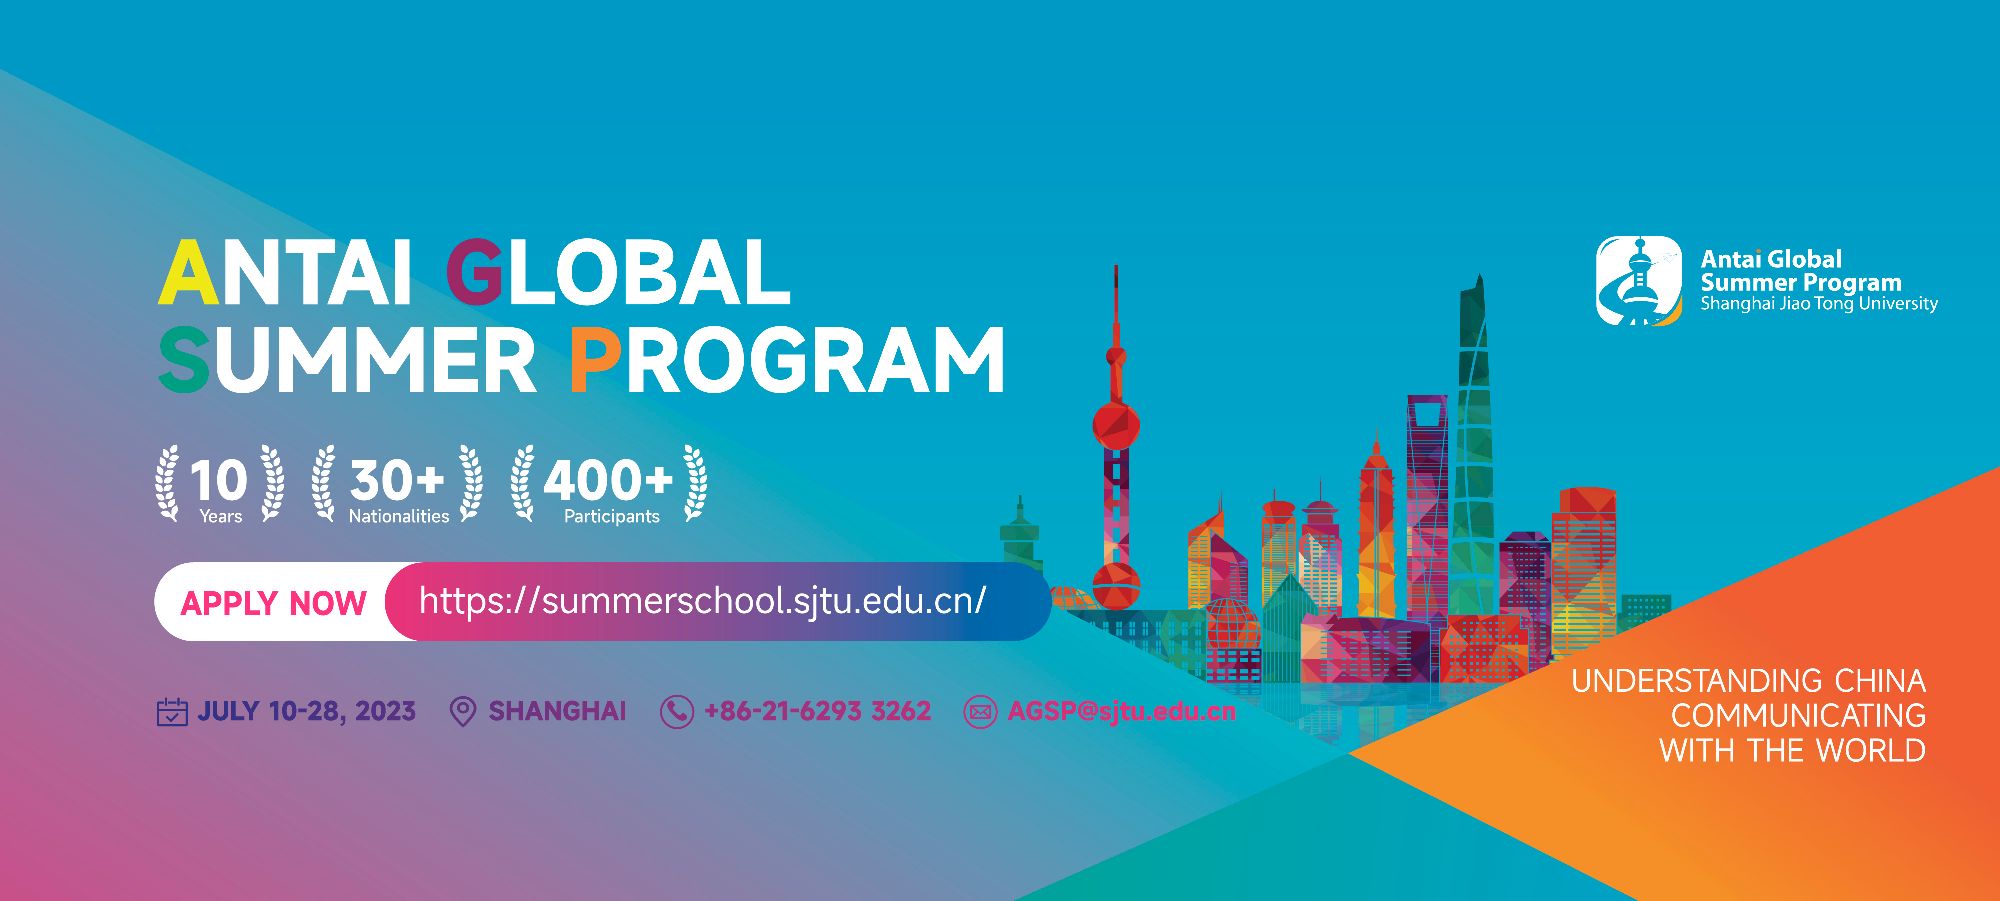 Application for 2023 Antai Global Summer Program is Now Open